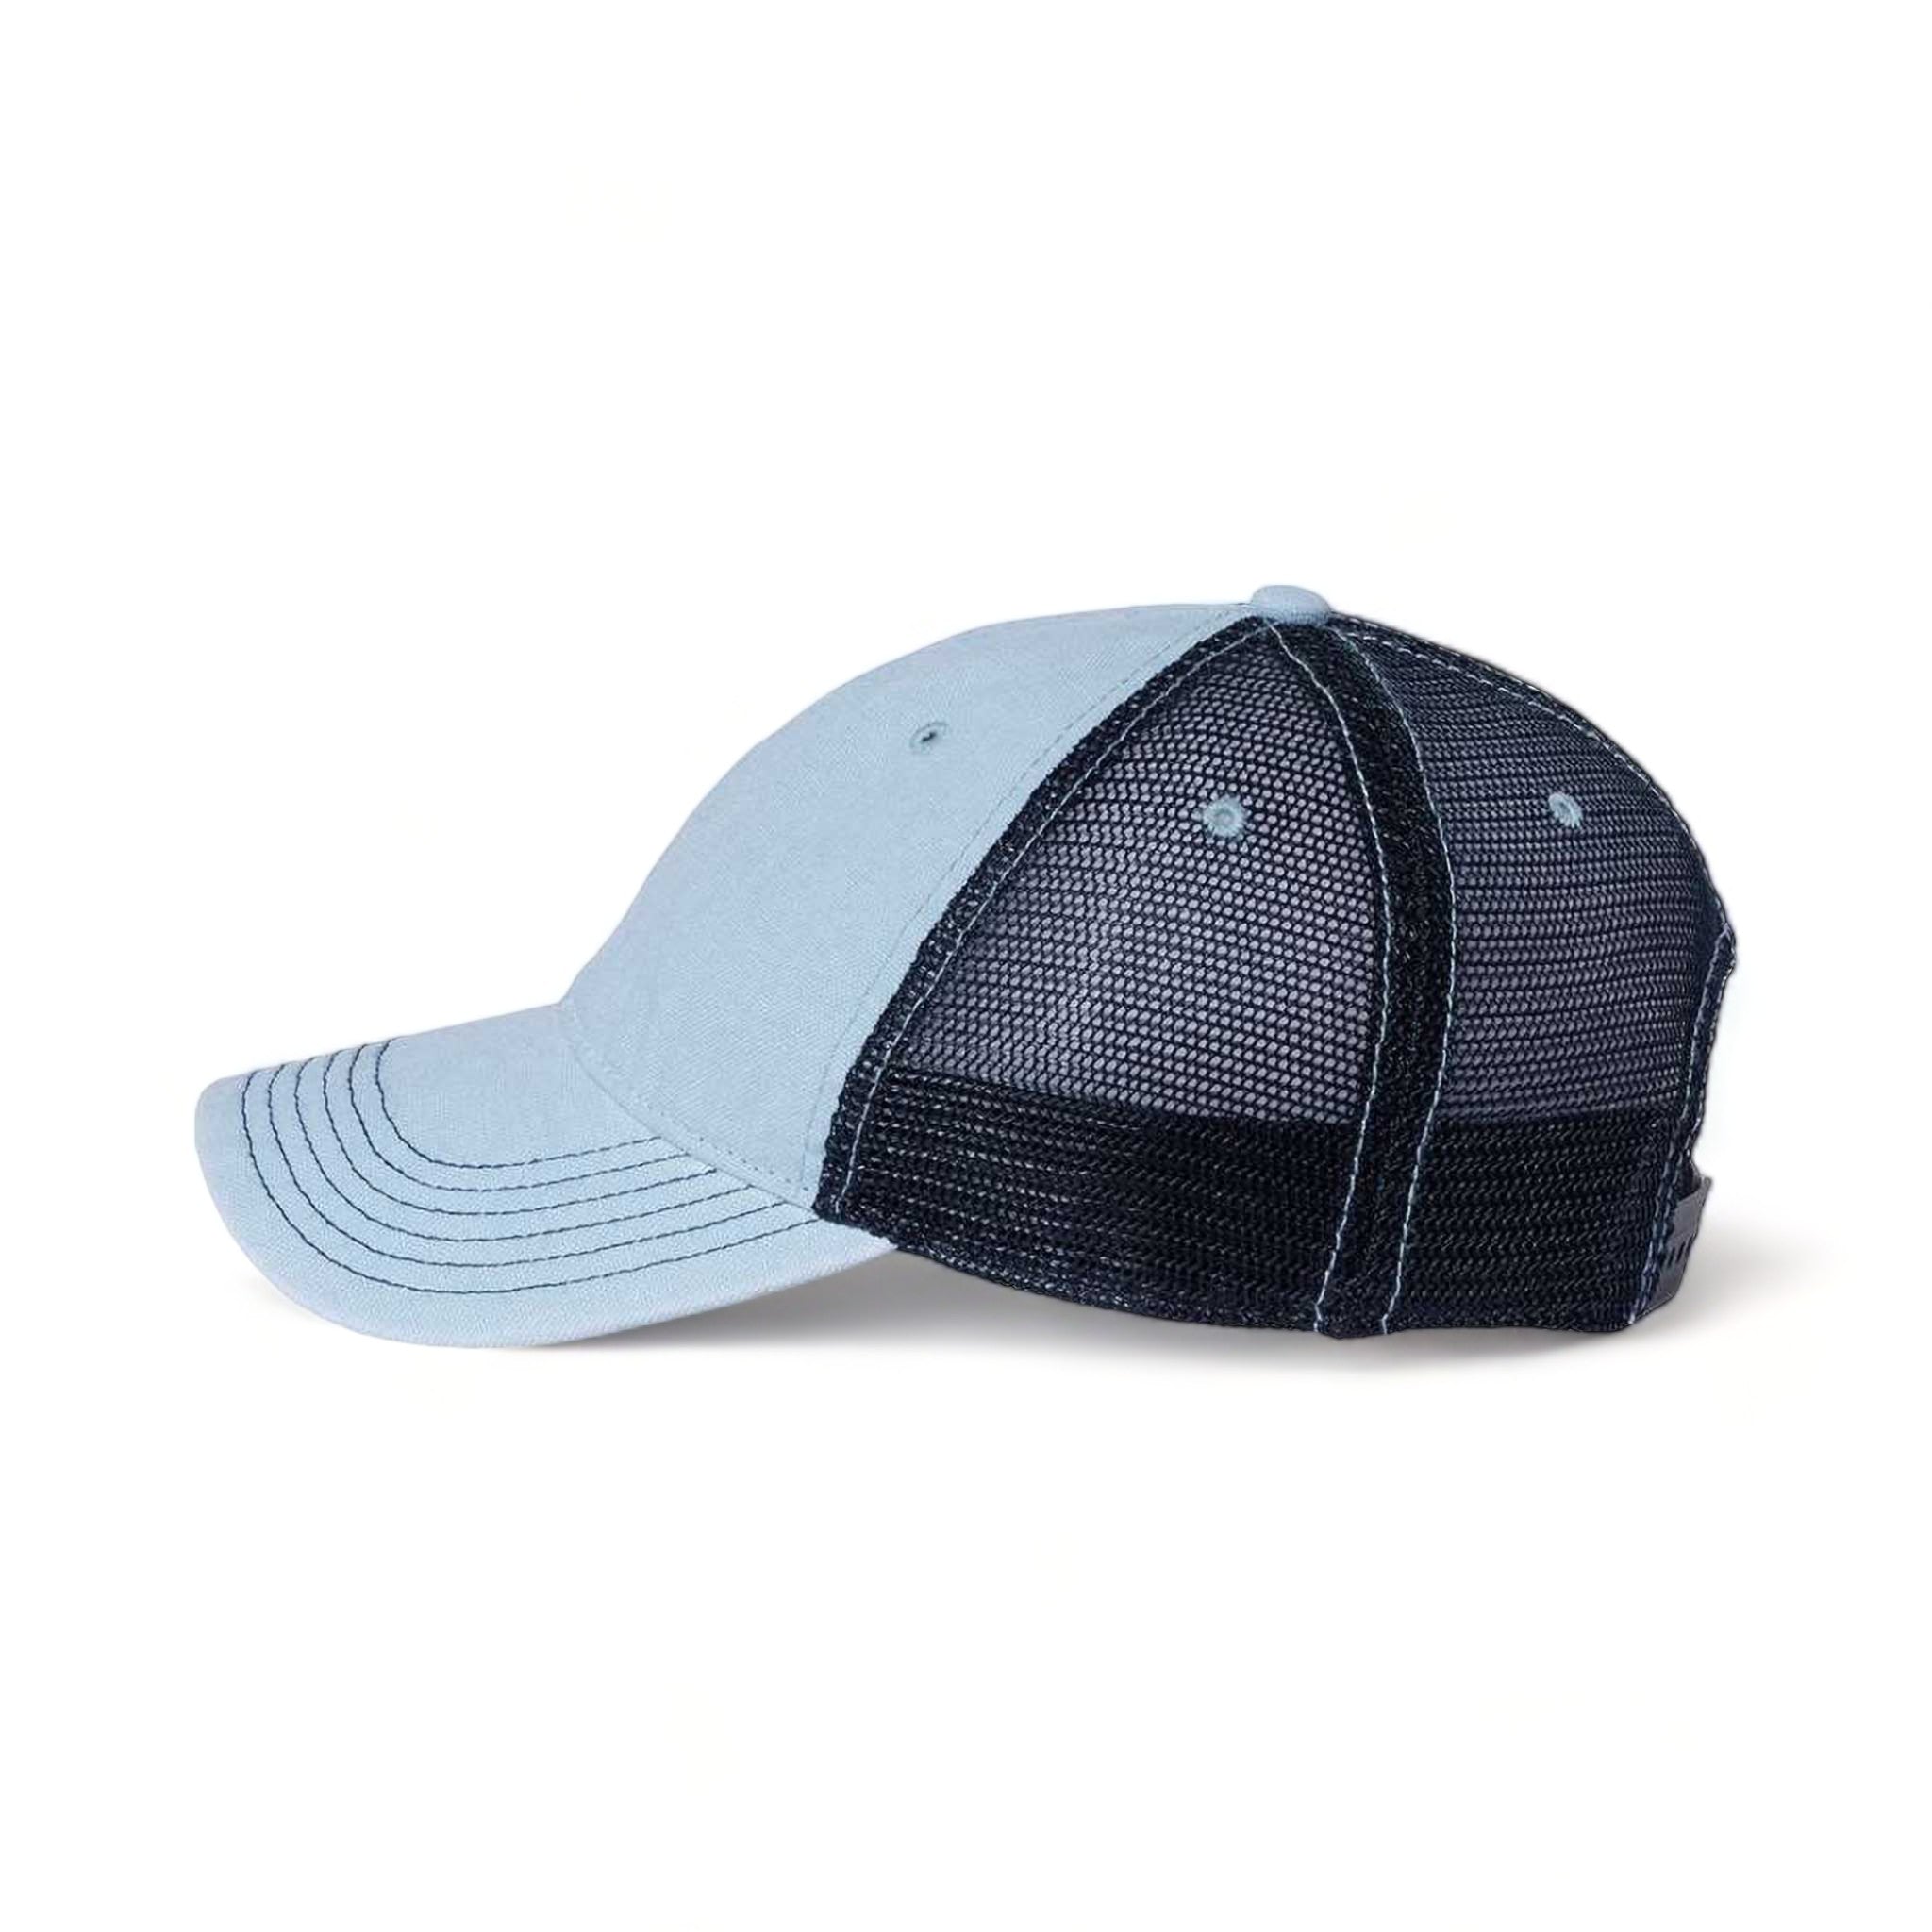 Side view of LEGACY DTA custom hat in light blue and navy